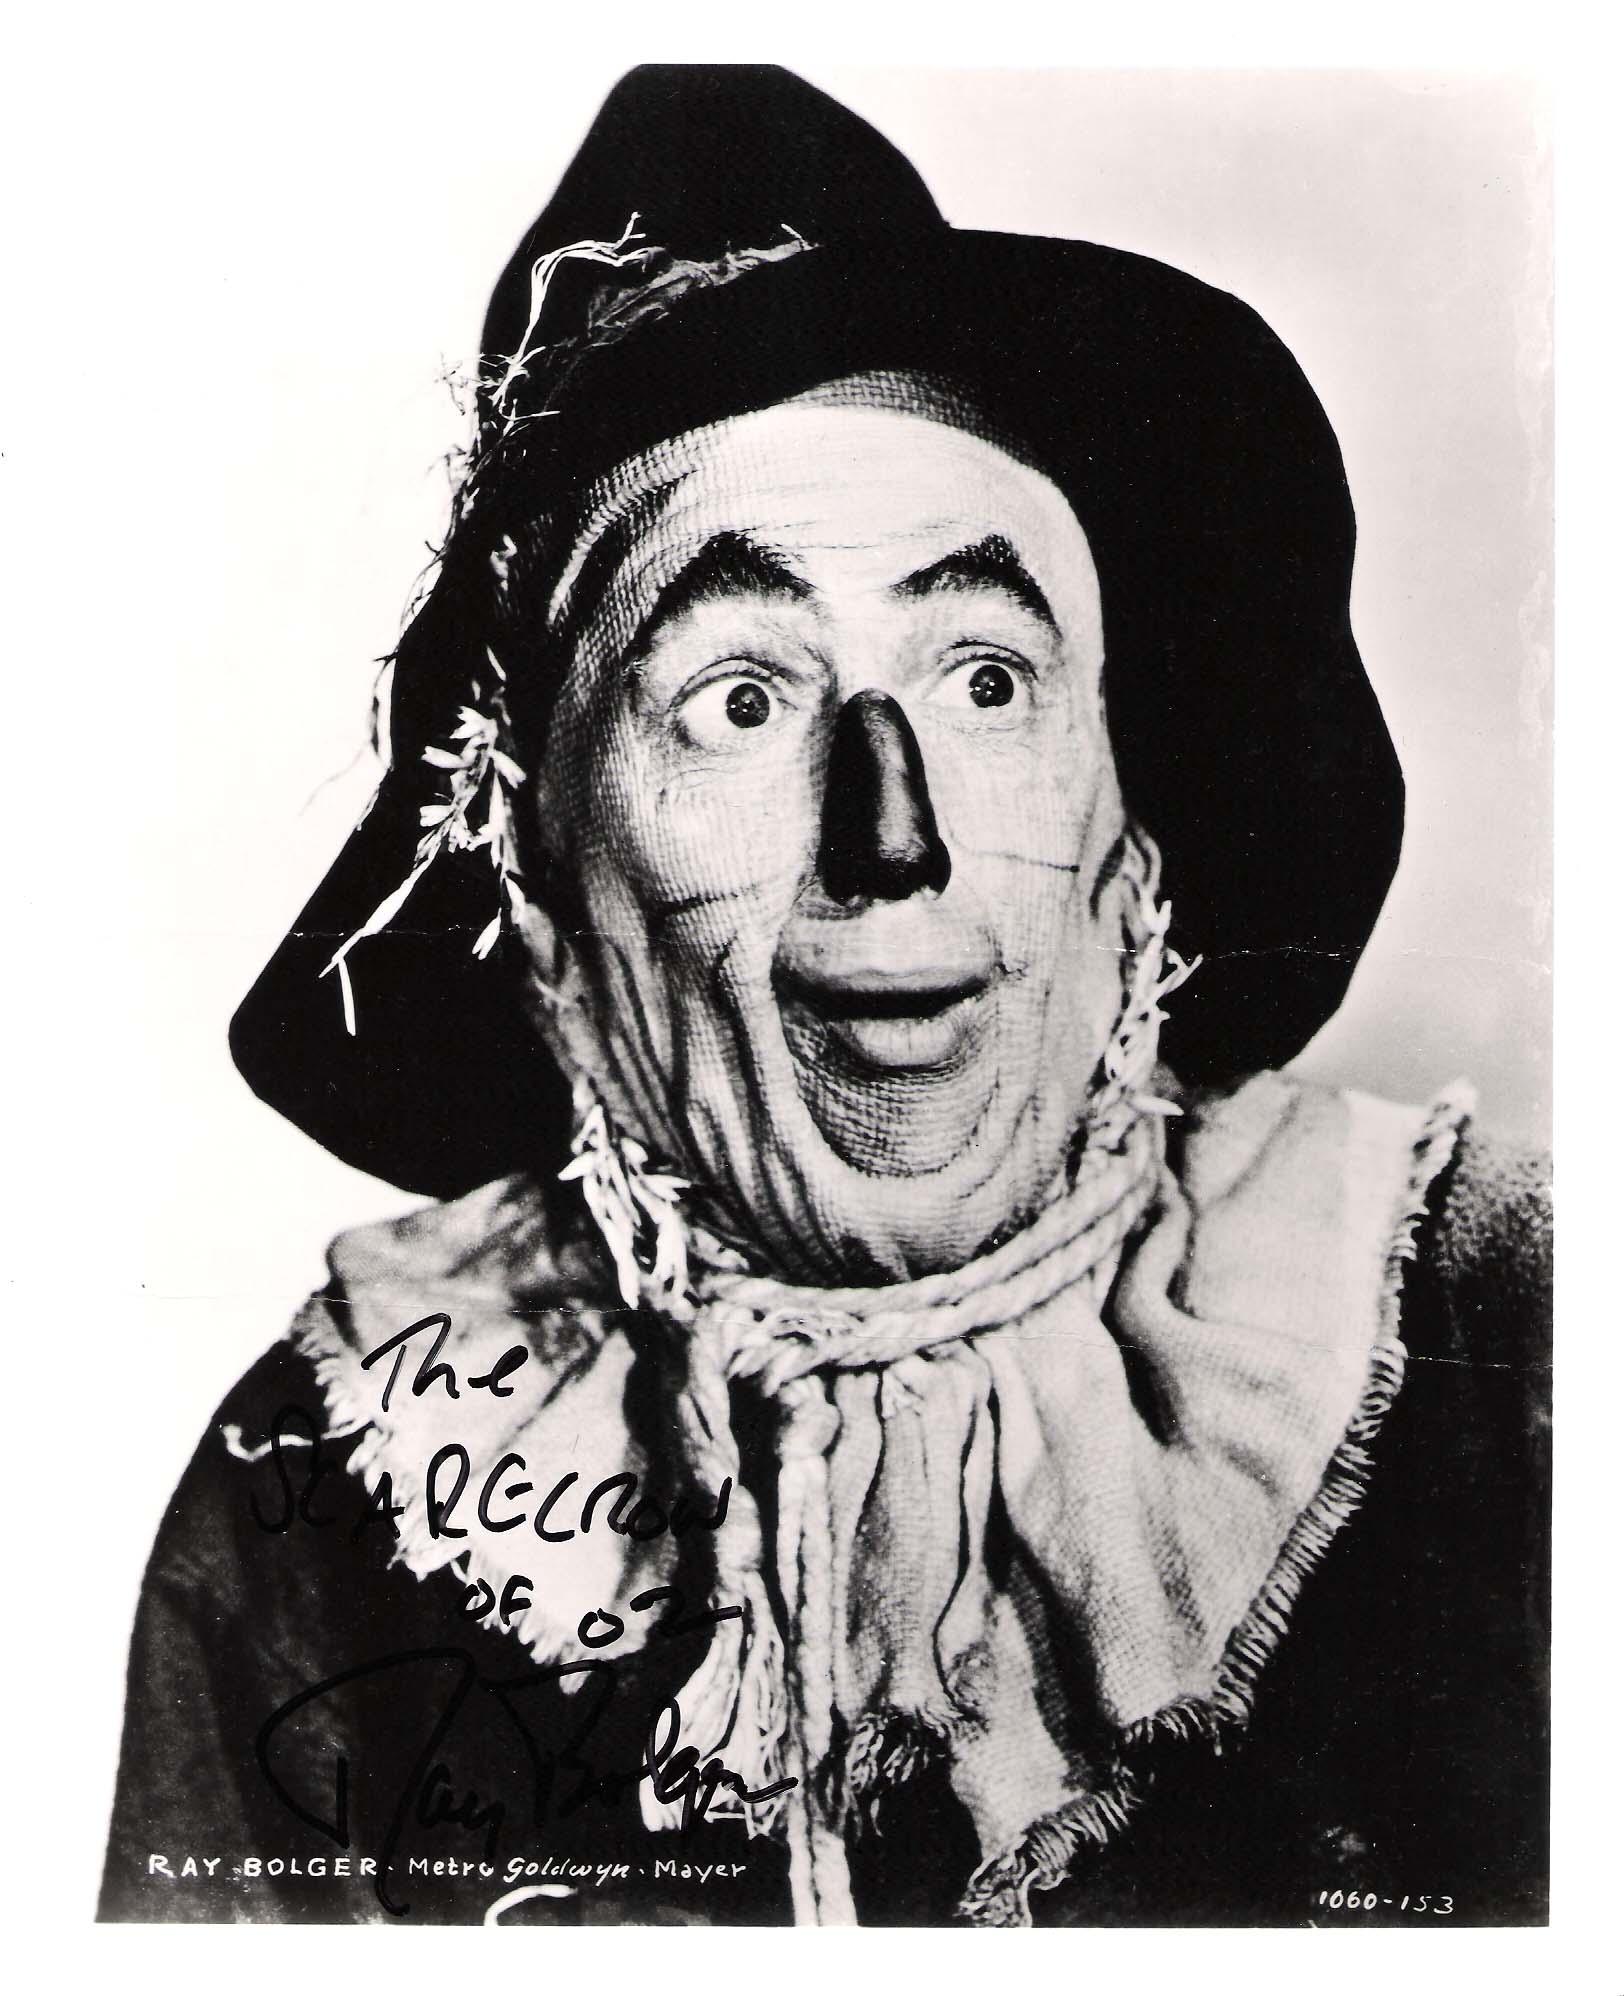 RAY BOLGER - Best Known for his Portrayal of the SCARECROW in 